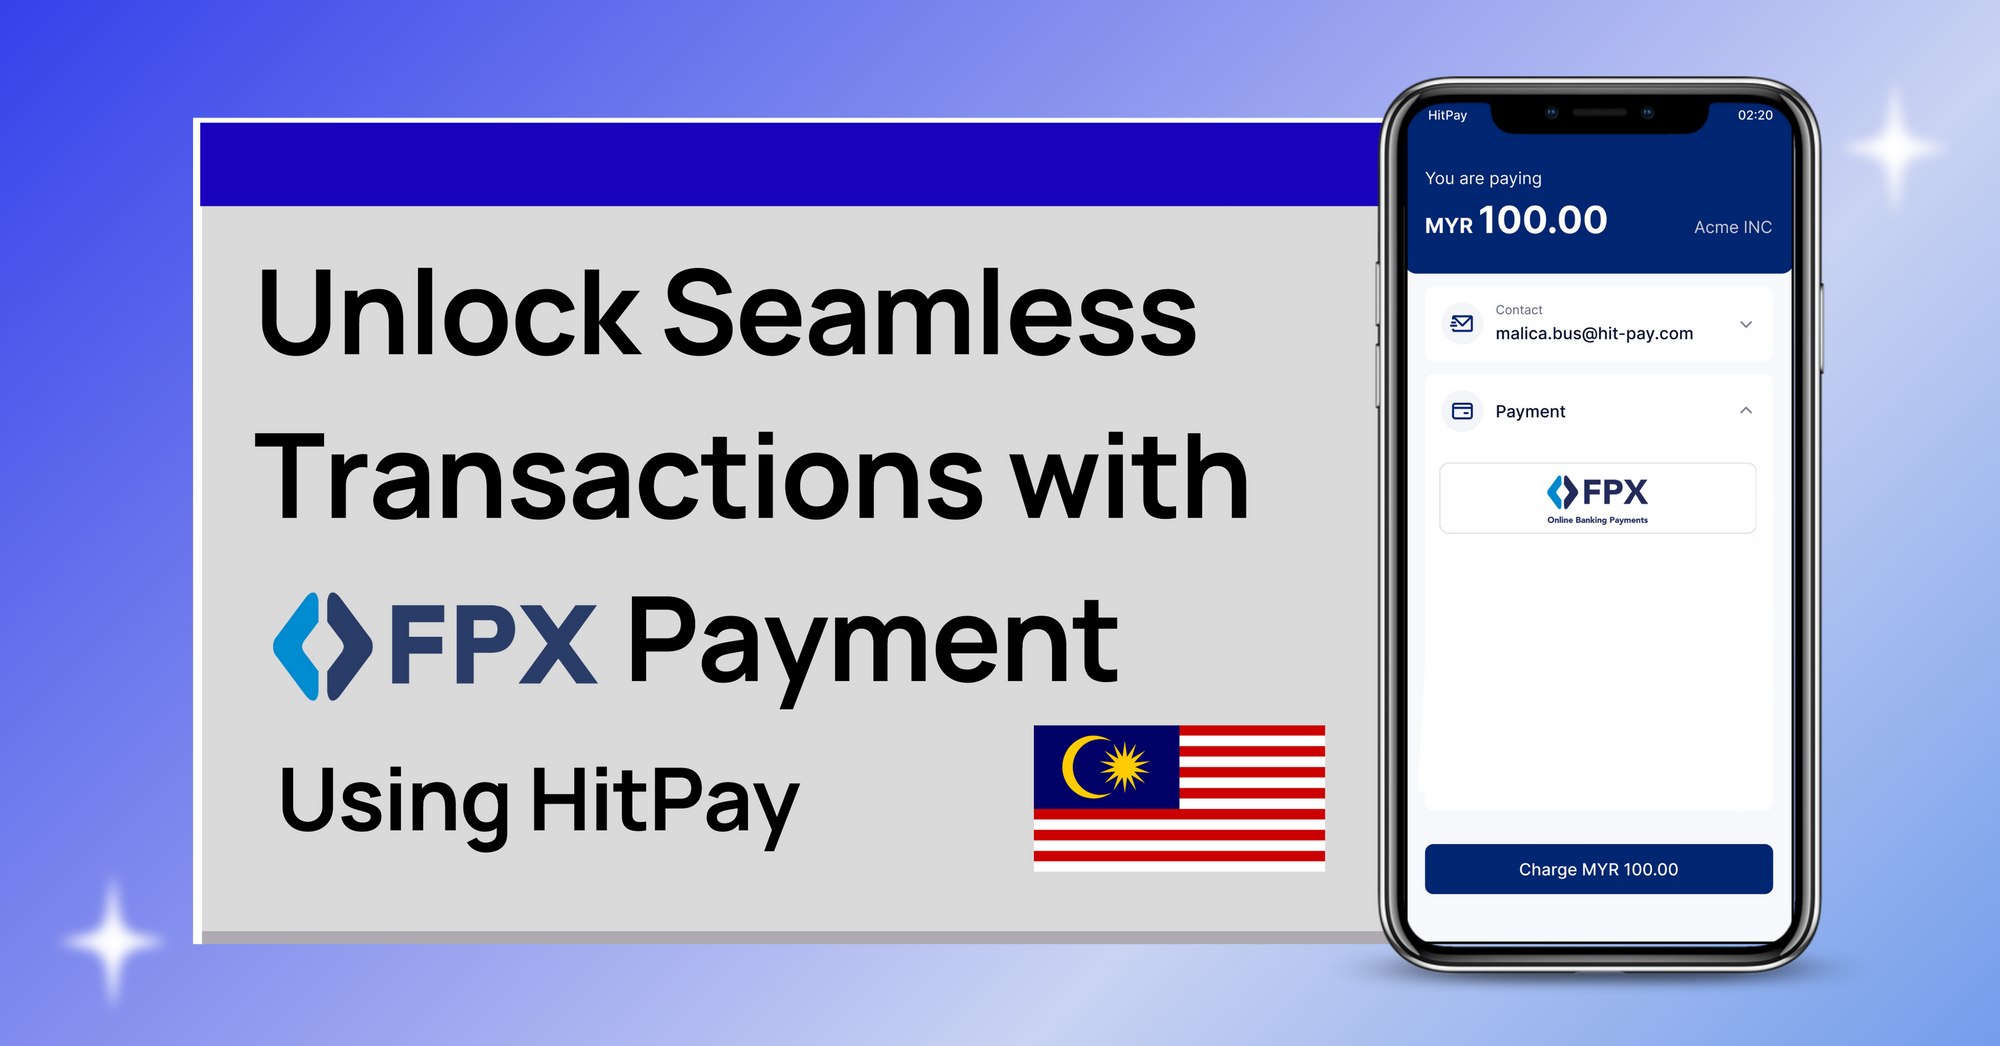 Unlock Seamless Transactions with FPX Payment in Malaysia Using HitPay